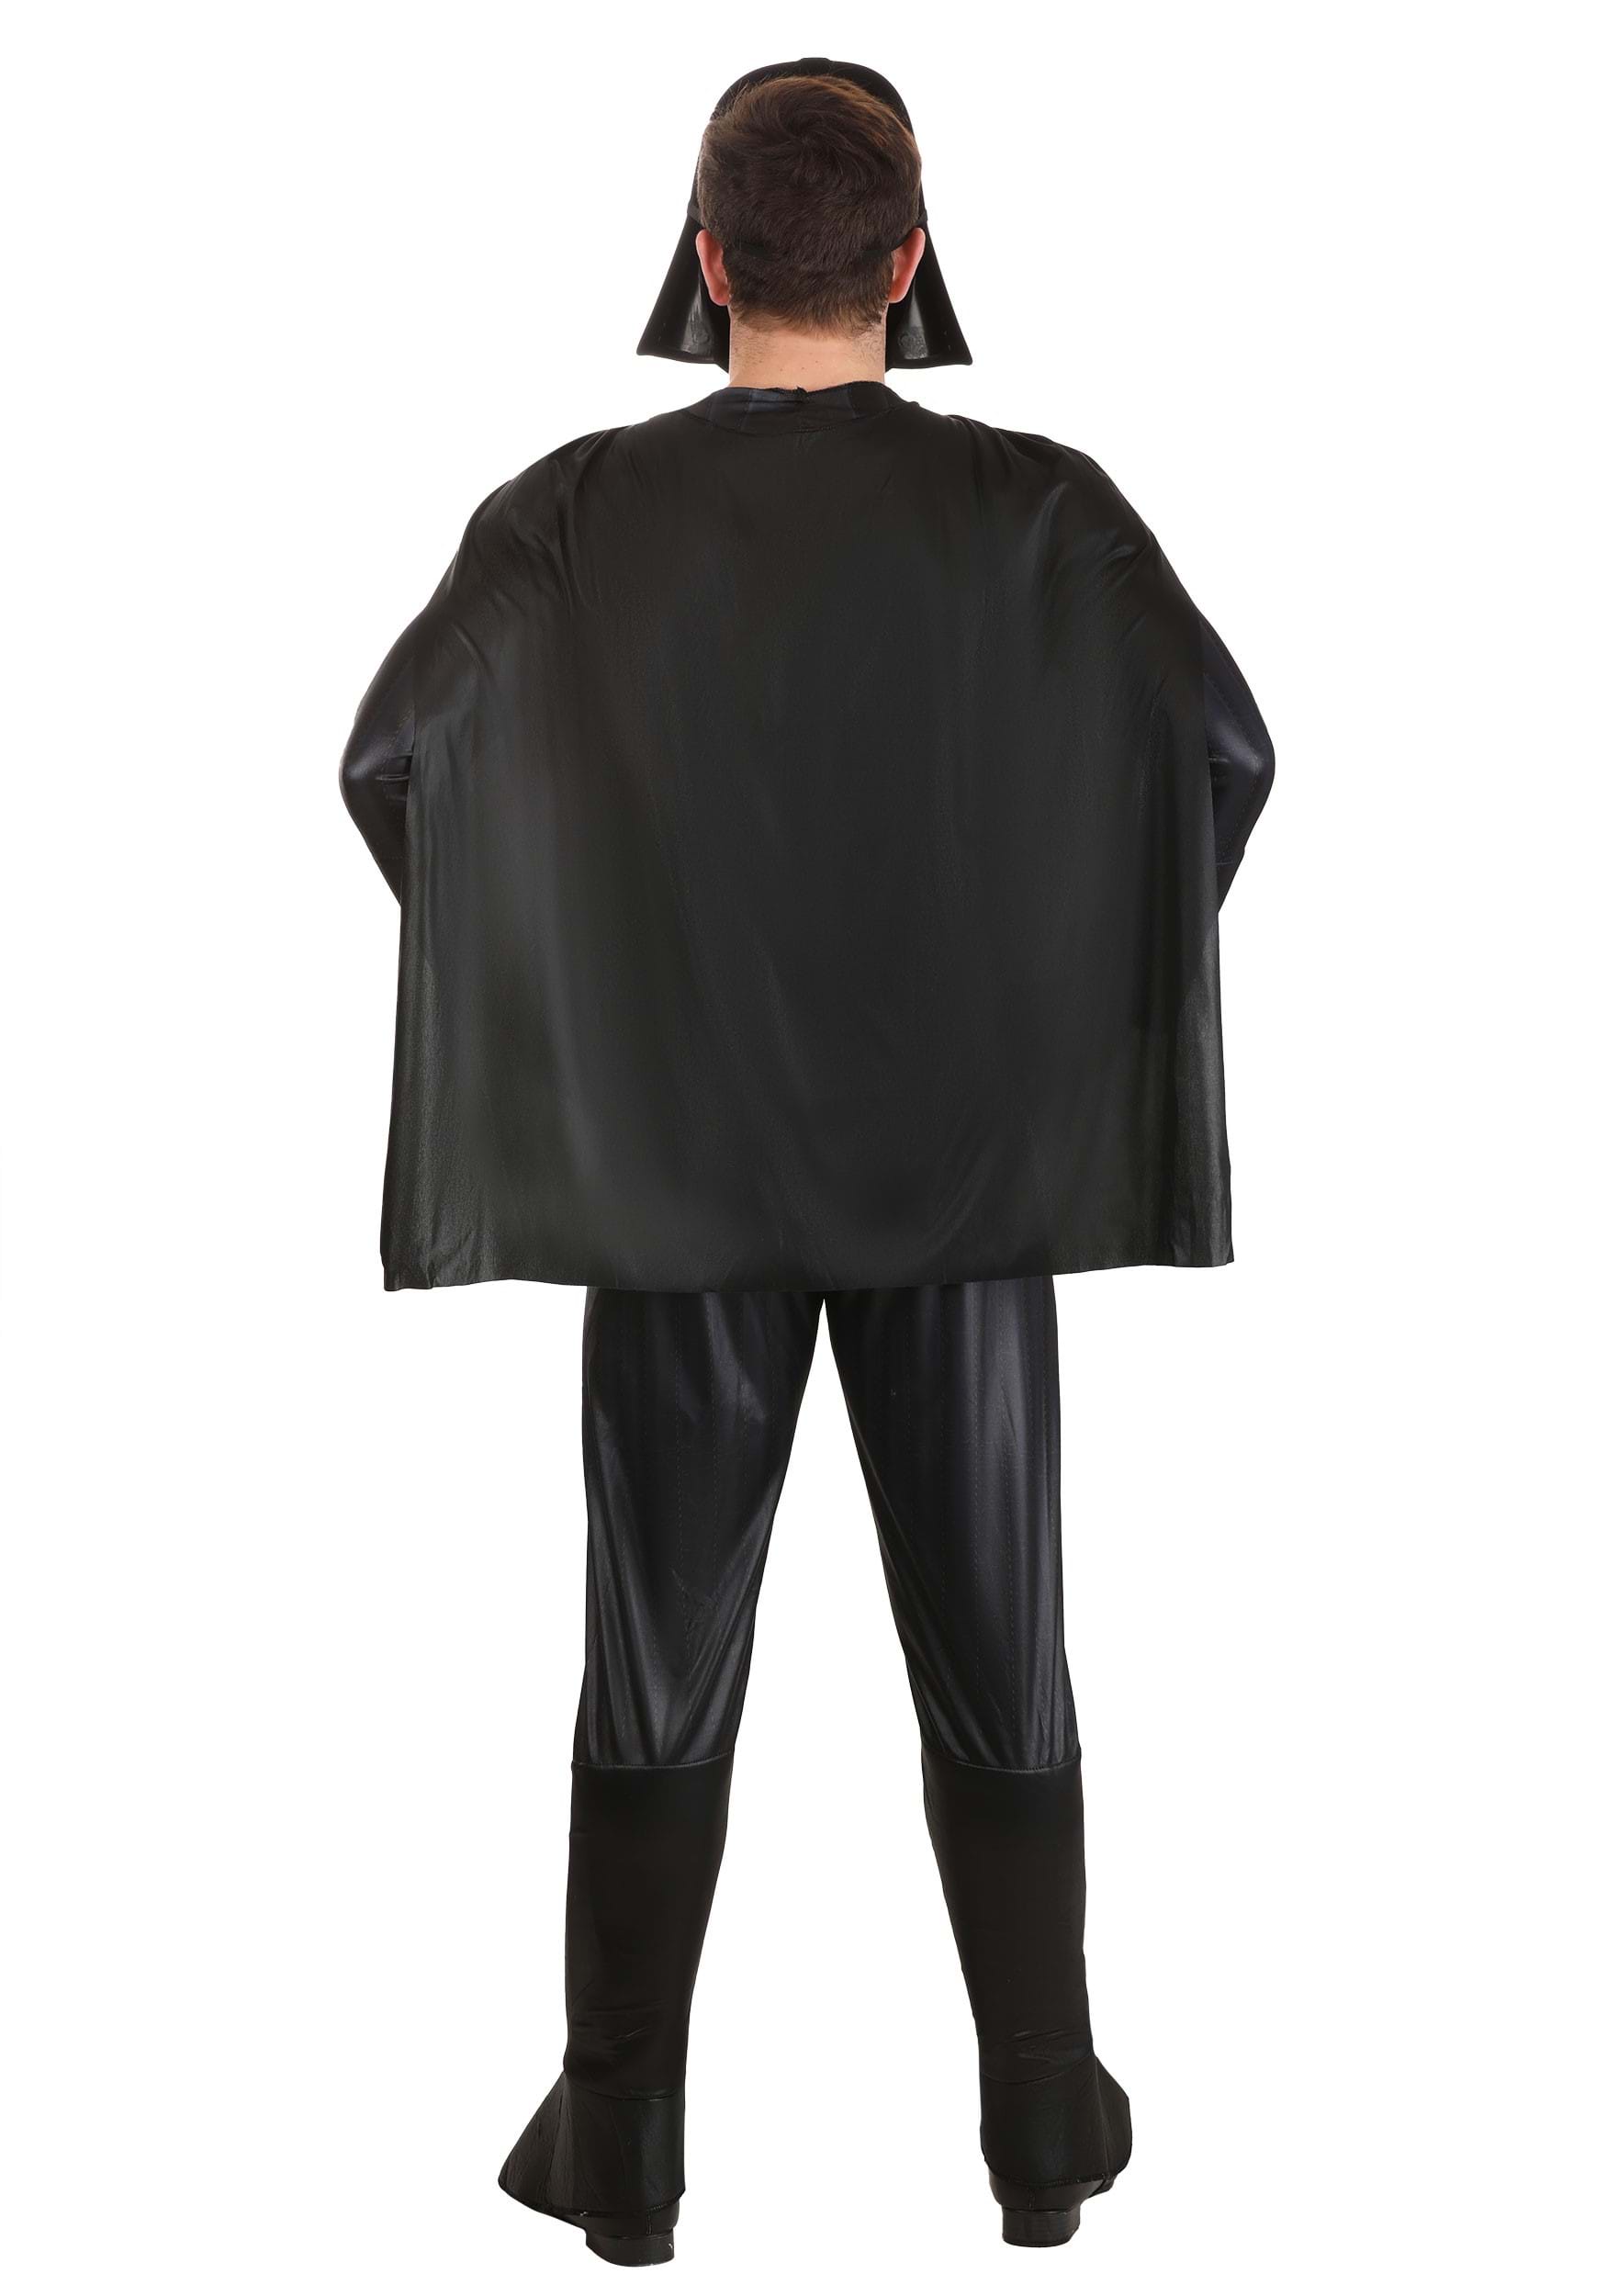 Darth Vader Costume For Adults